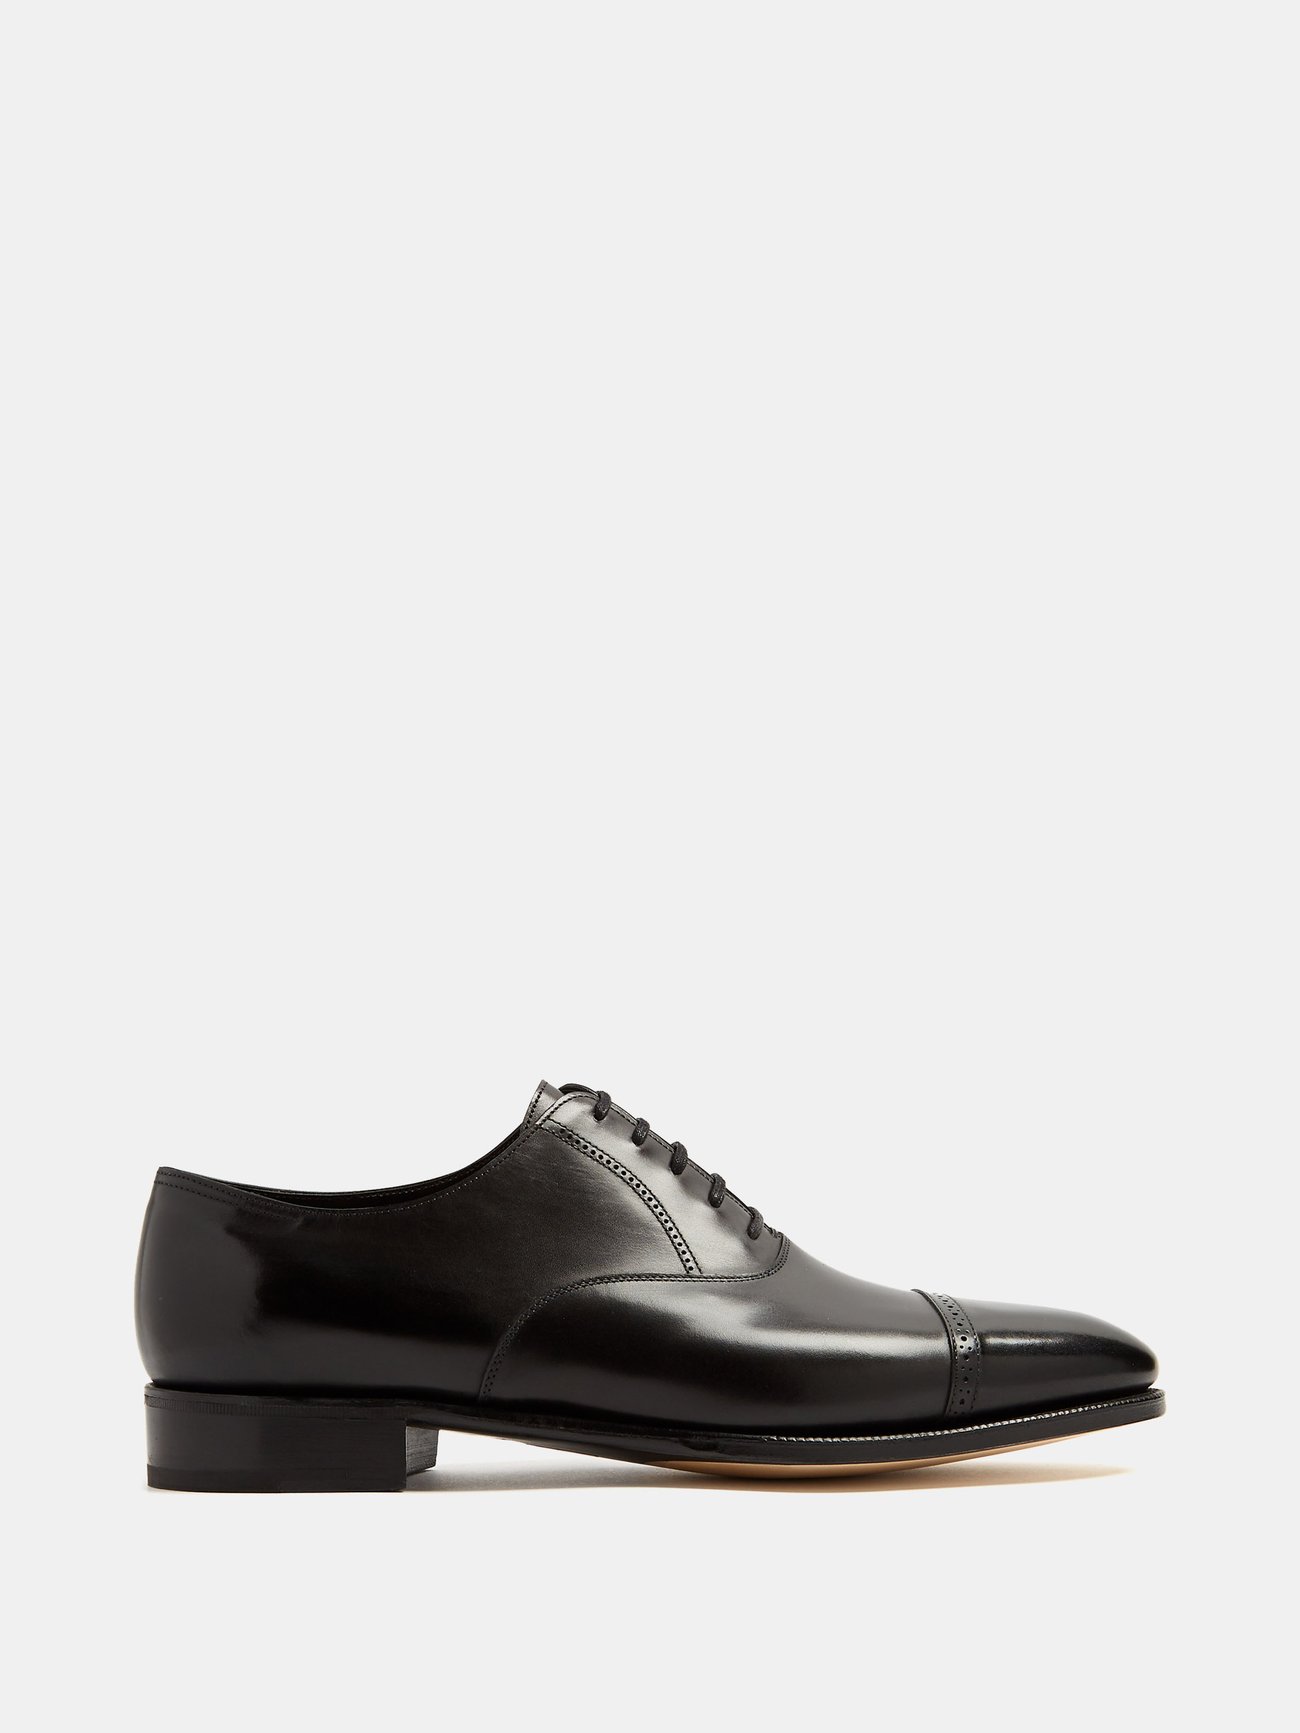 Phillip II leather oxford shoes